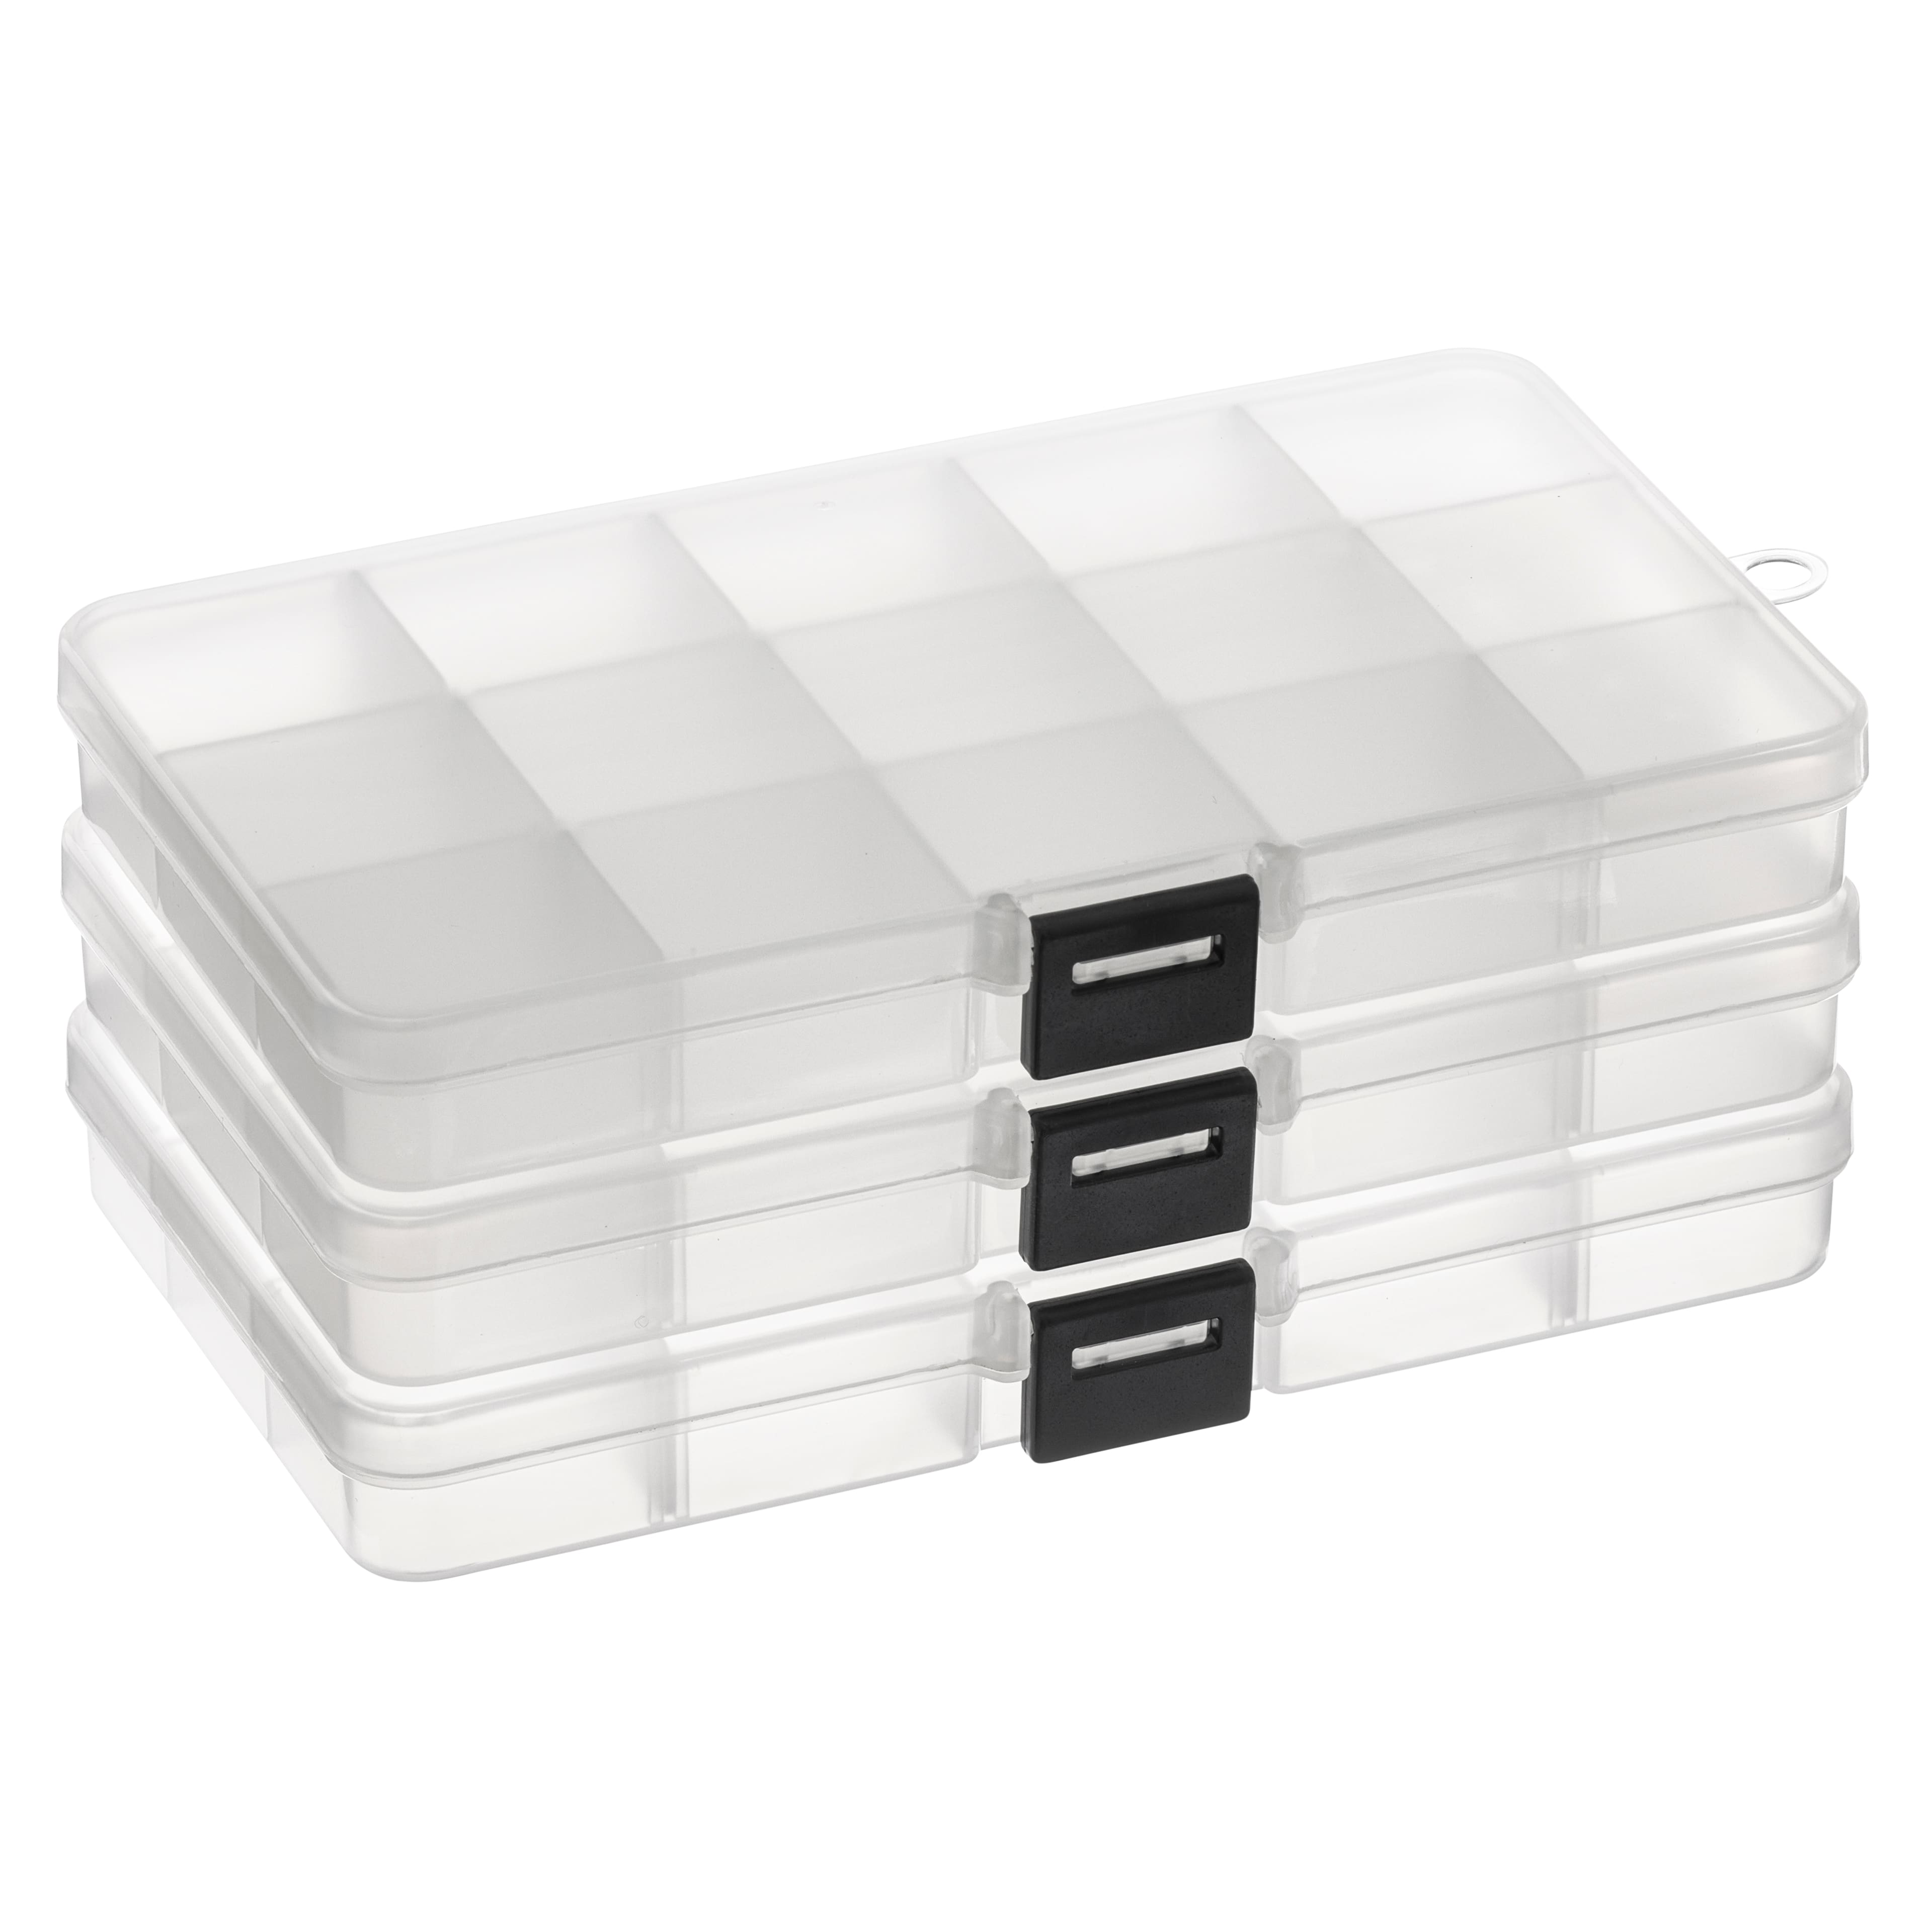  Juvale 3 Pack Bead Storage Organizer Box with 36 Grids and  Removable Dividers - Plastic Container Tray for Craft, Jewelry and Earrings  : Arts, Crafts & Sewing